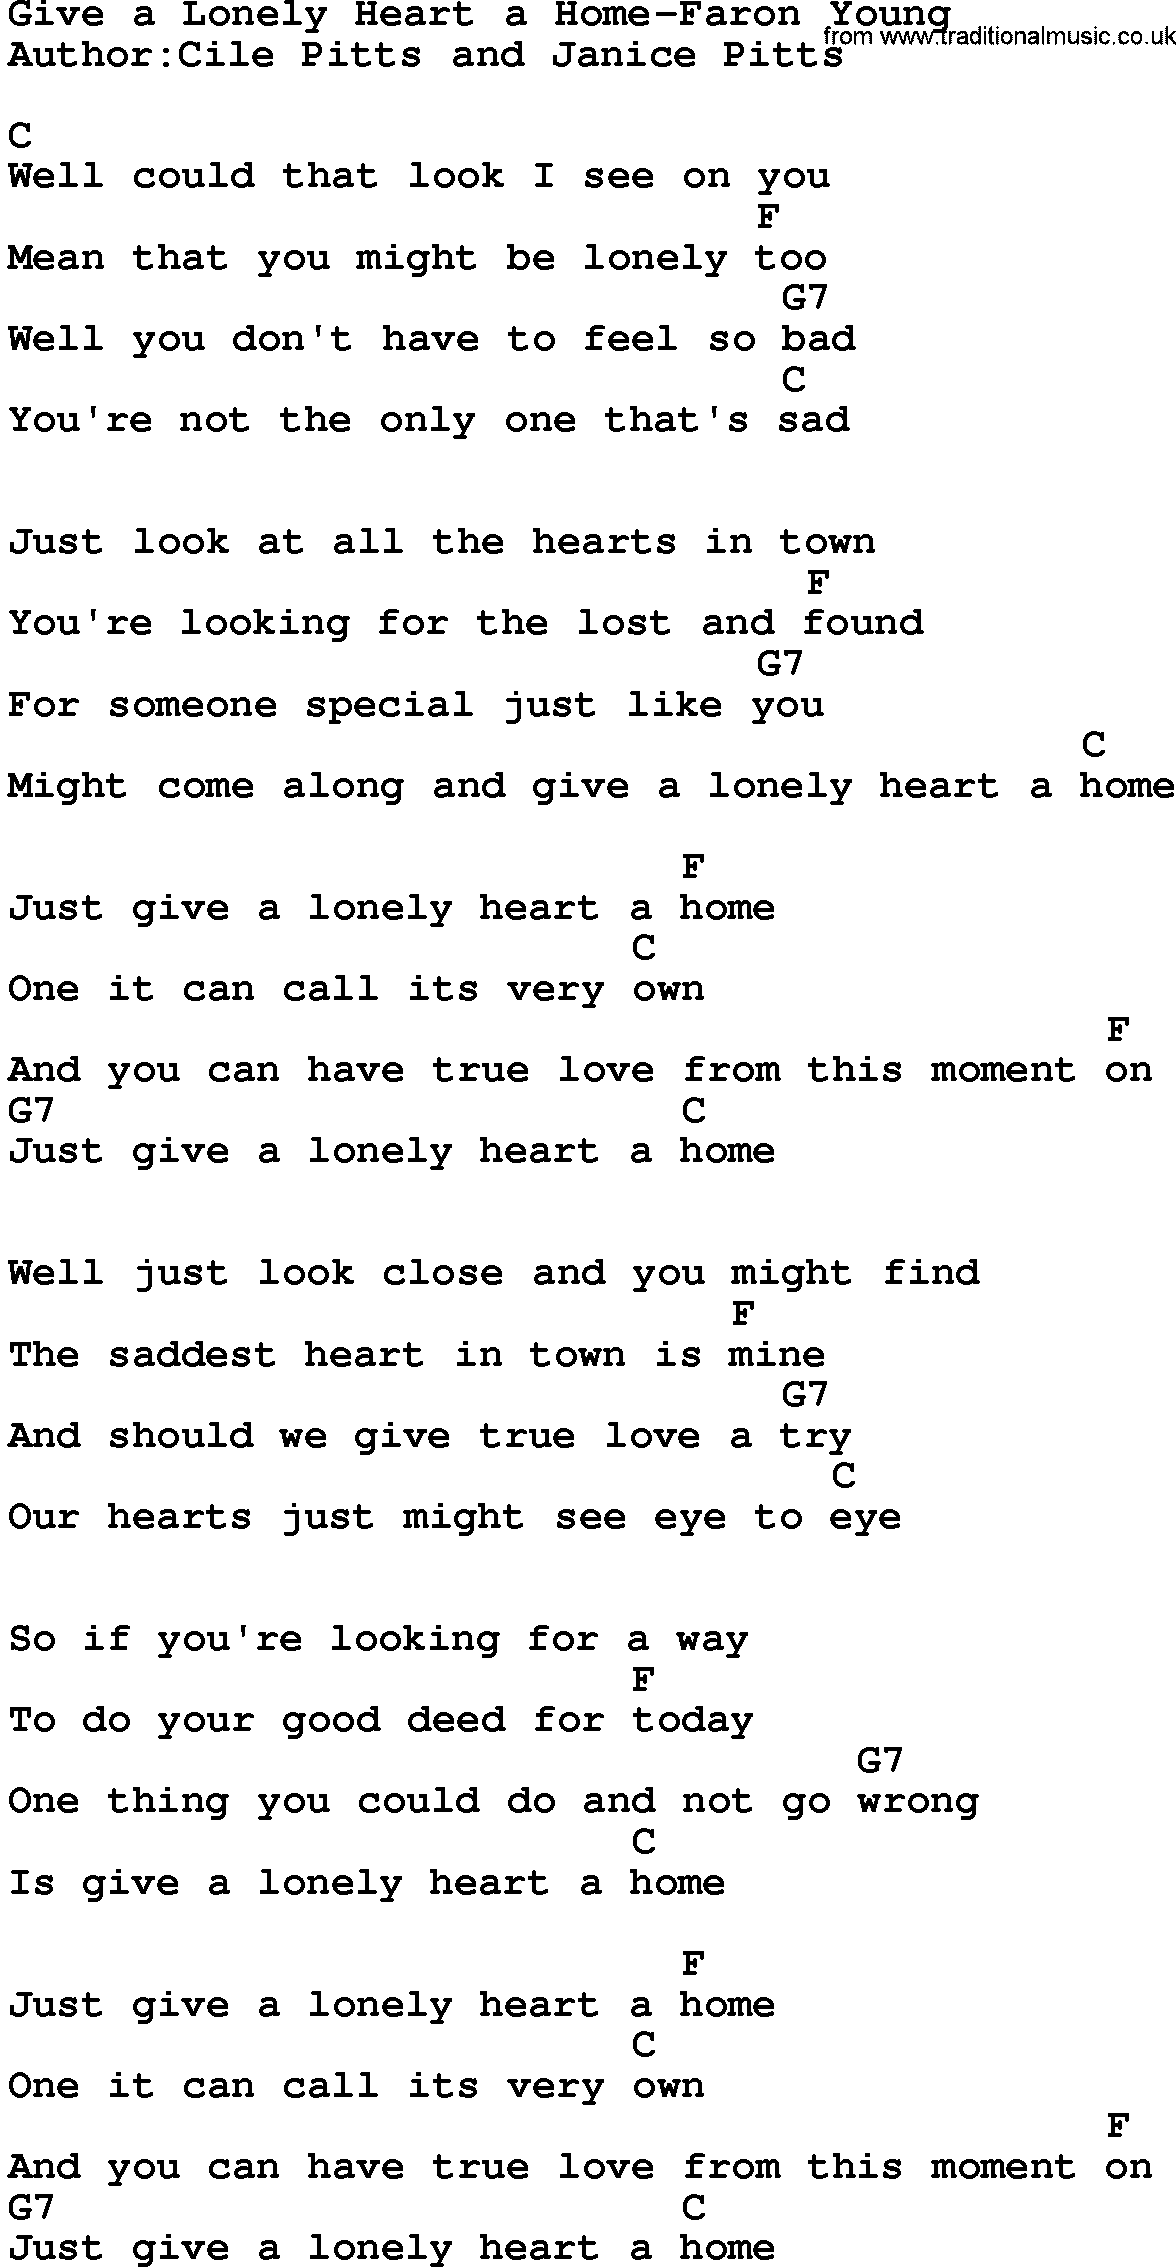 Country music song: Give A Lonely Heart A Home-Faron Young lyrics and chords